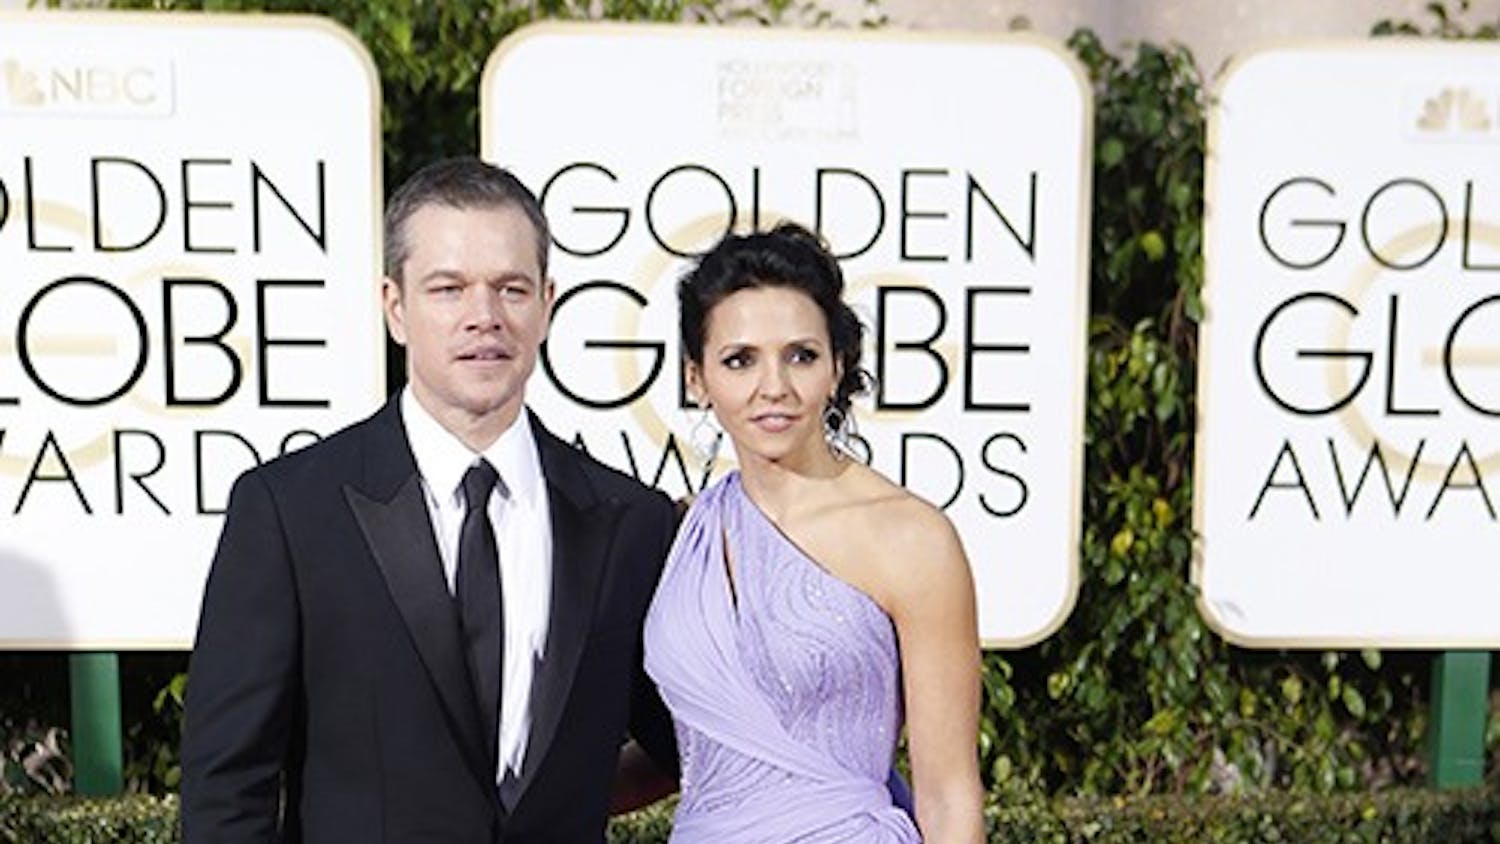 Matt Damon and Luciana Barroso arrive at the 73rd Annual Golden Globe Awards show at the Beverly Hilton Hotel in Beverly Hills, Calif., on Sunday, Jan. 10, 2016. (Wally Skalij/Los Angeles Times/TNS)